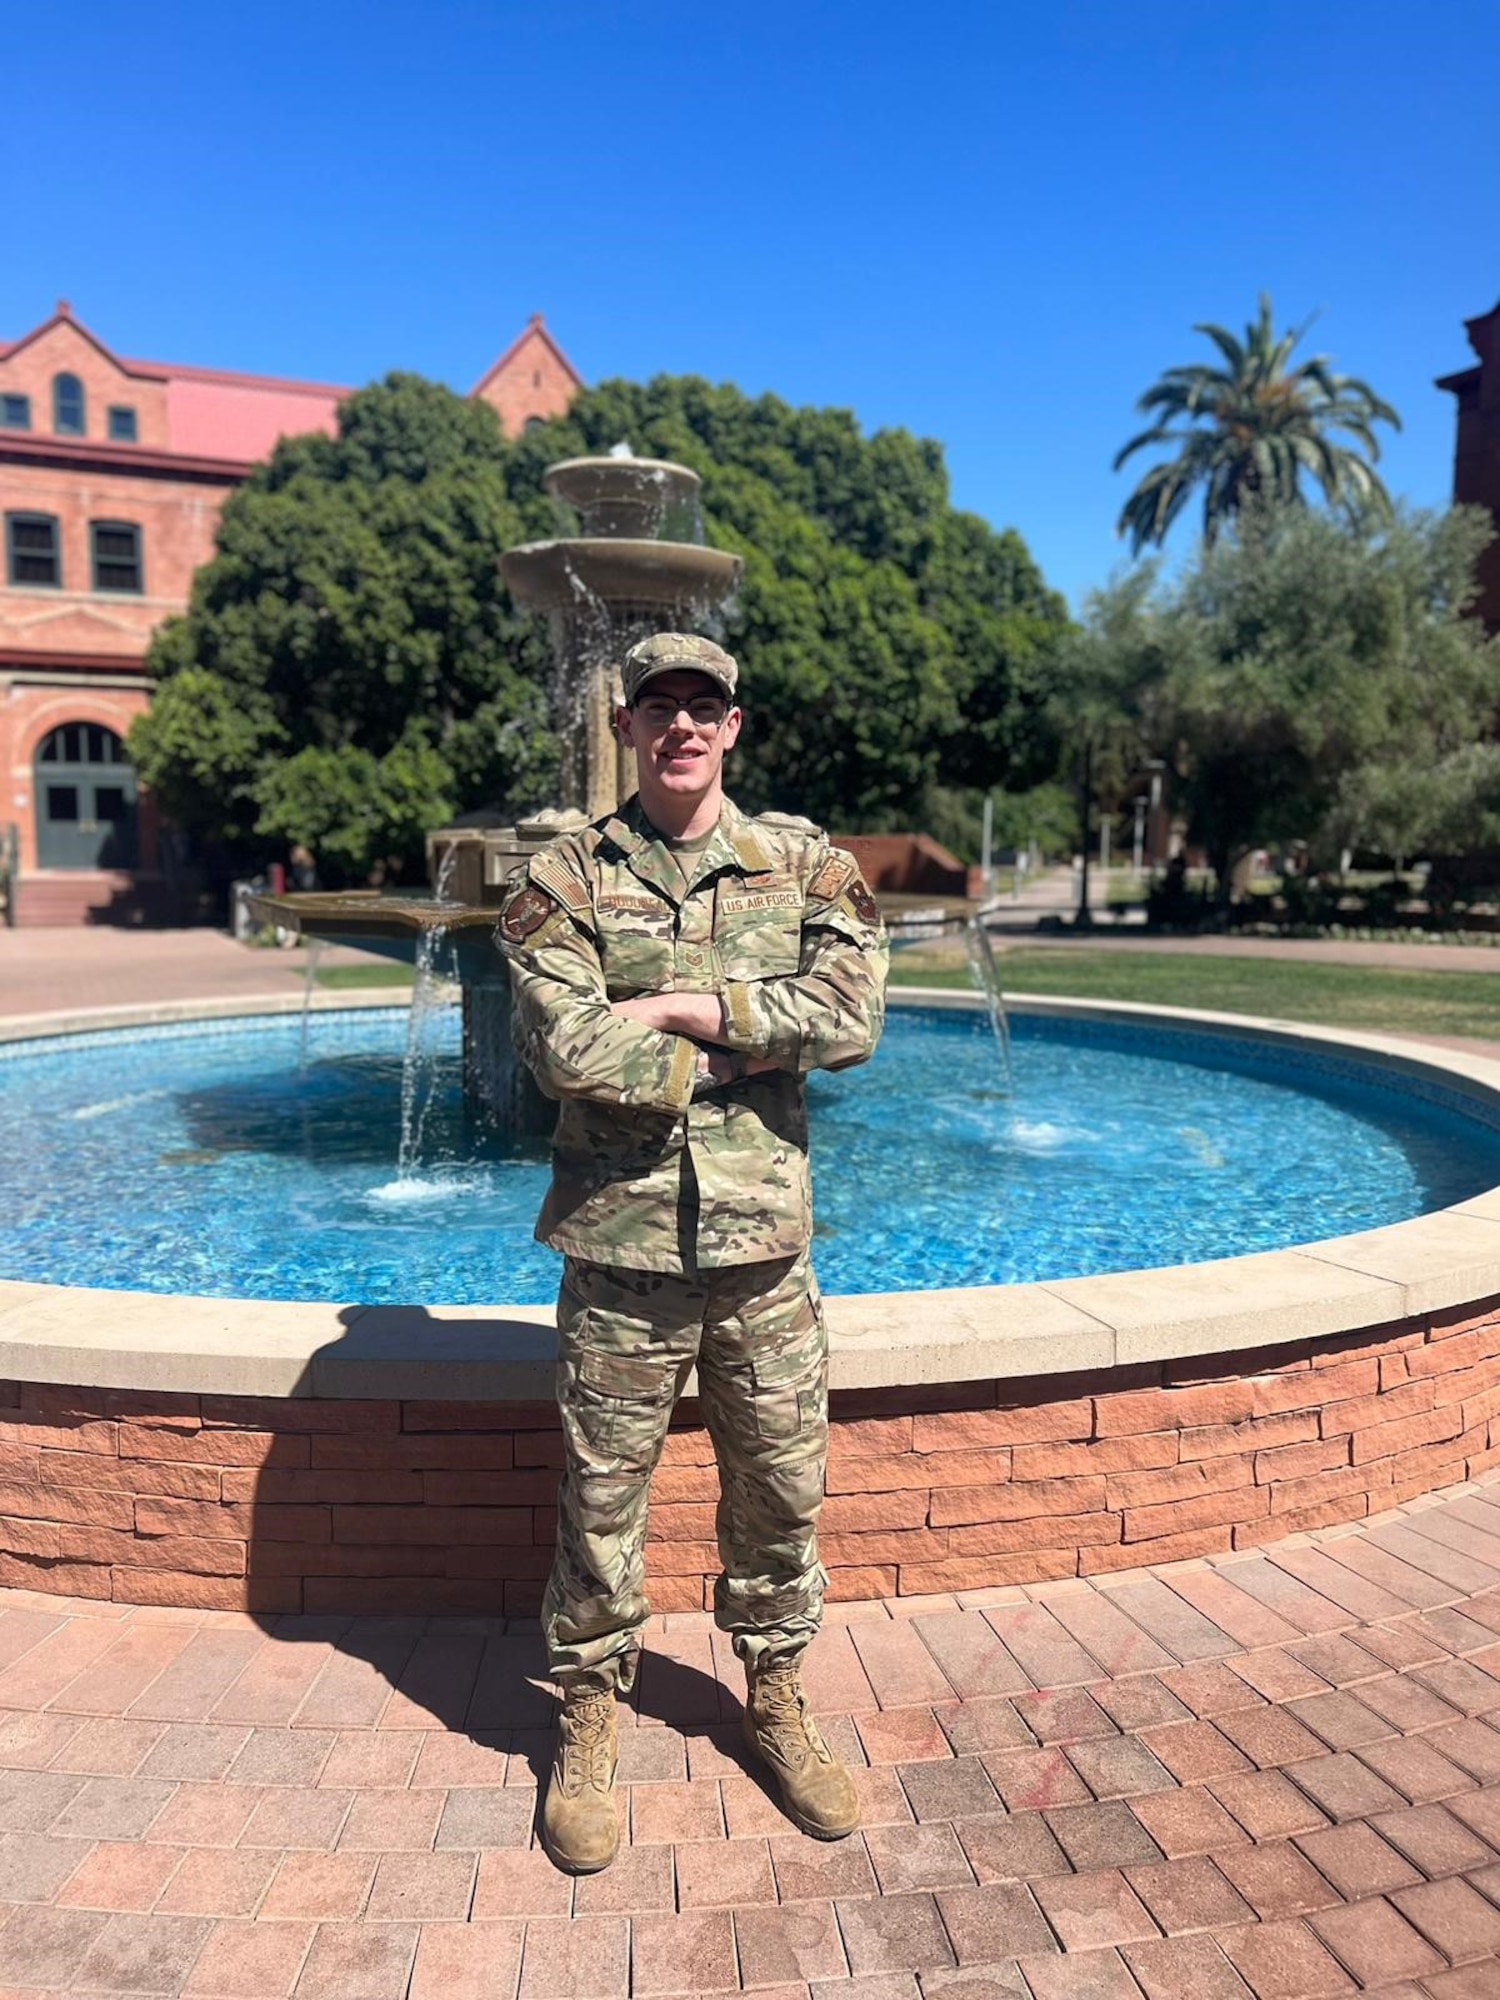 Courtesy photo provided for the upcoming Instagram Takeover of a current Air Force cadet as a enlisted Reserve Officer Training Corps (ROTC) training instructor showcases the AFROTC Detachment 025 at Arizona State University.